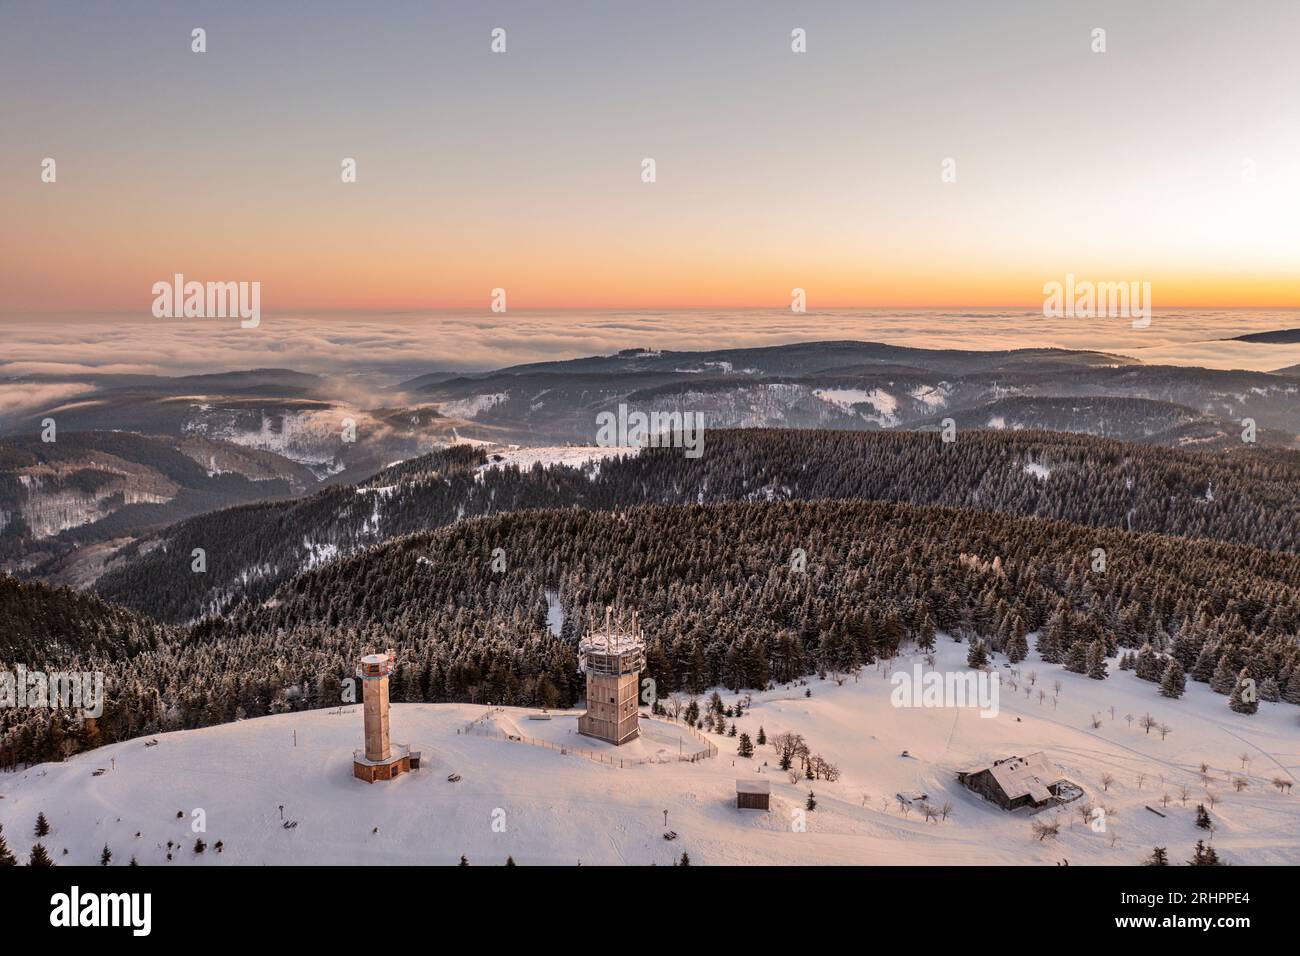 Germany, Thuringia, Suhl, Gehlberg, Schneekopf (second highest mountain of Thuringian Forest), observation and climbing tower, telecommunication tower, New Gehlberg Hut, forest, mountains, snow, overview, dawn, aerial photo Stock Photo